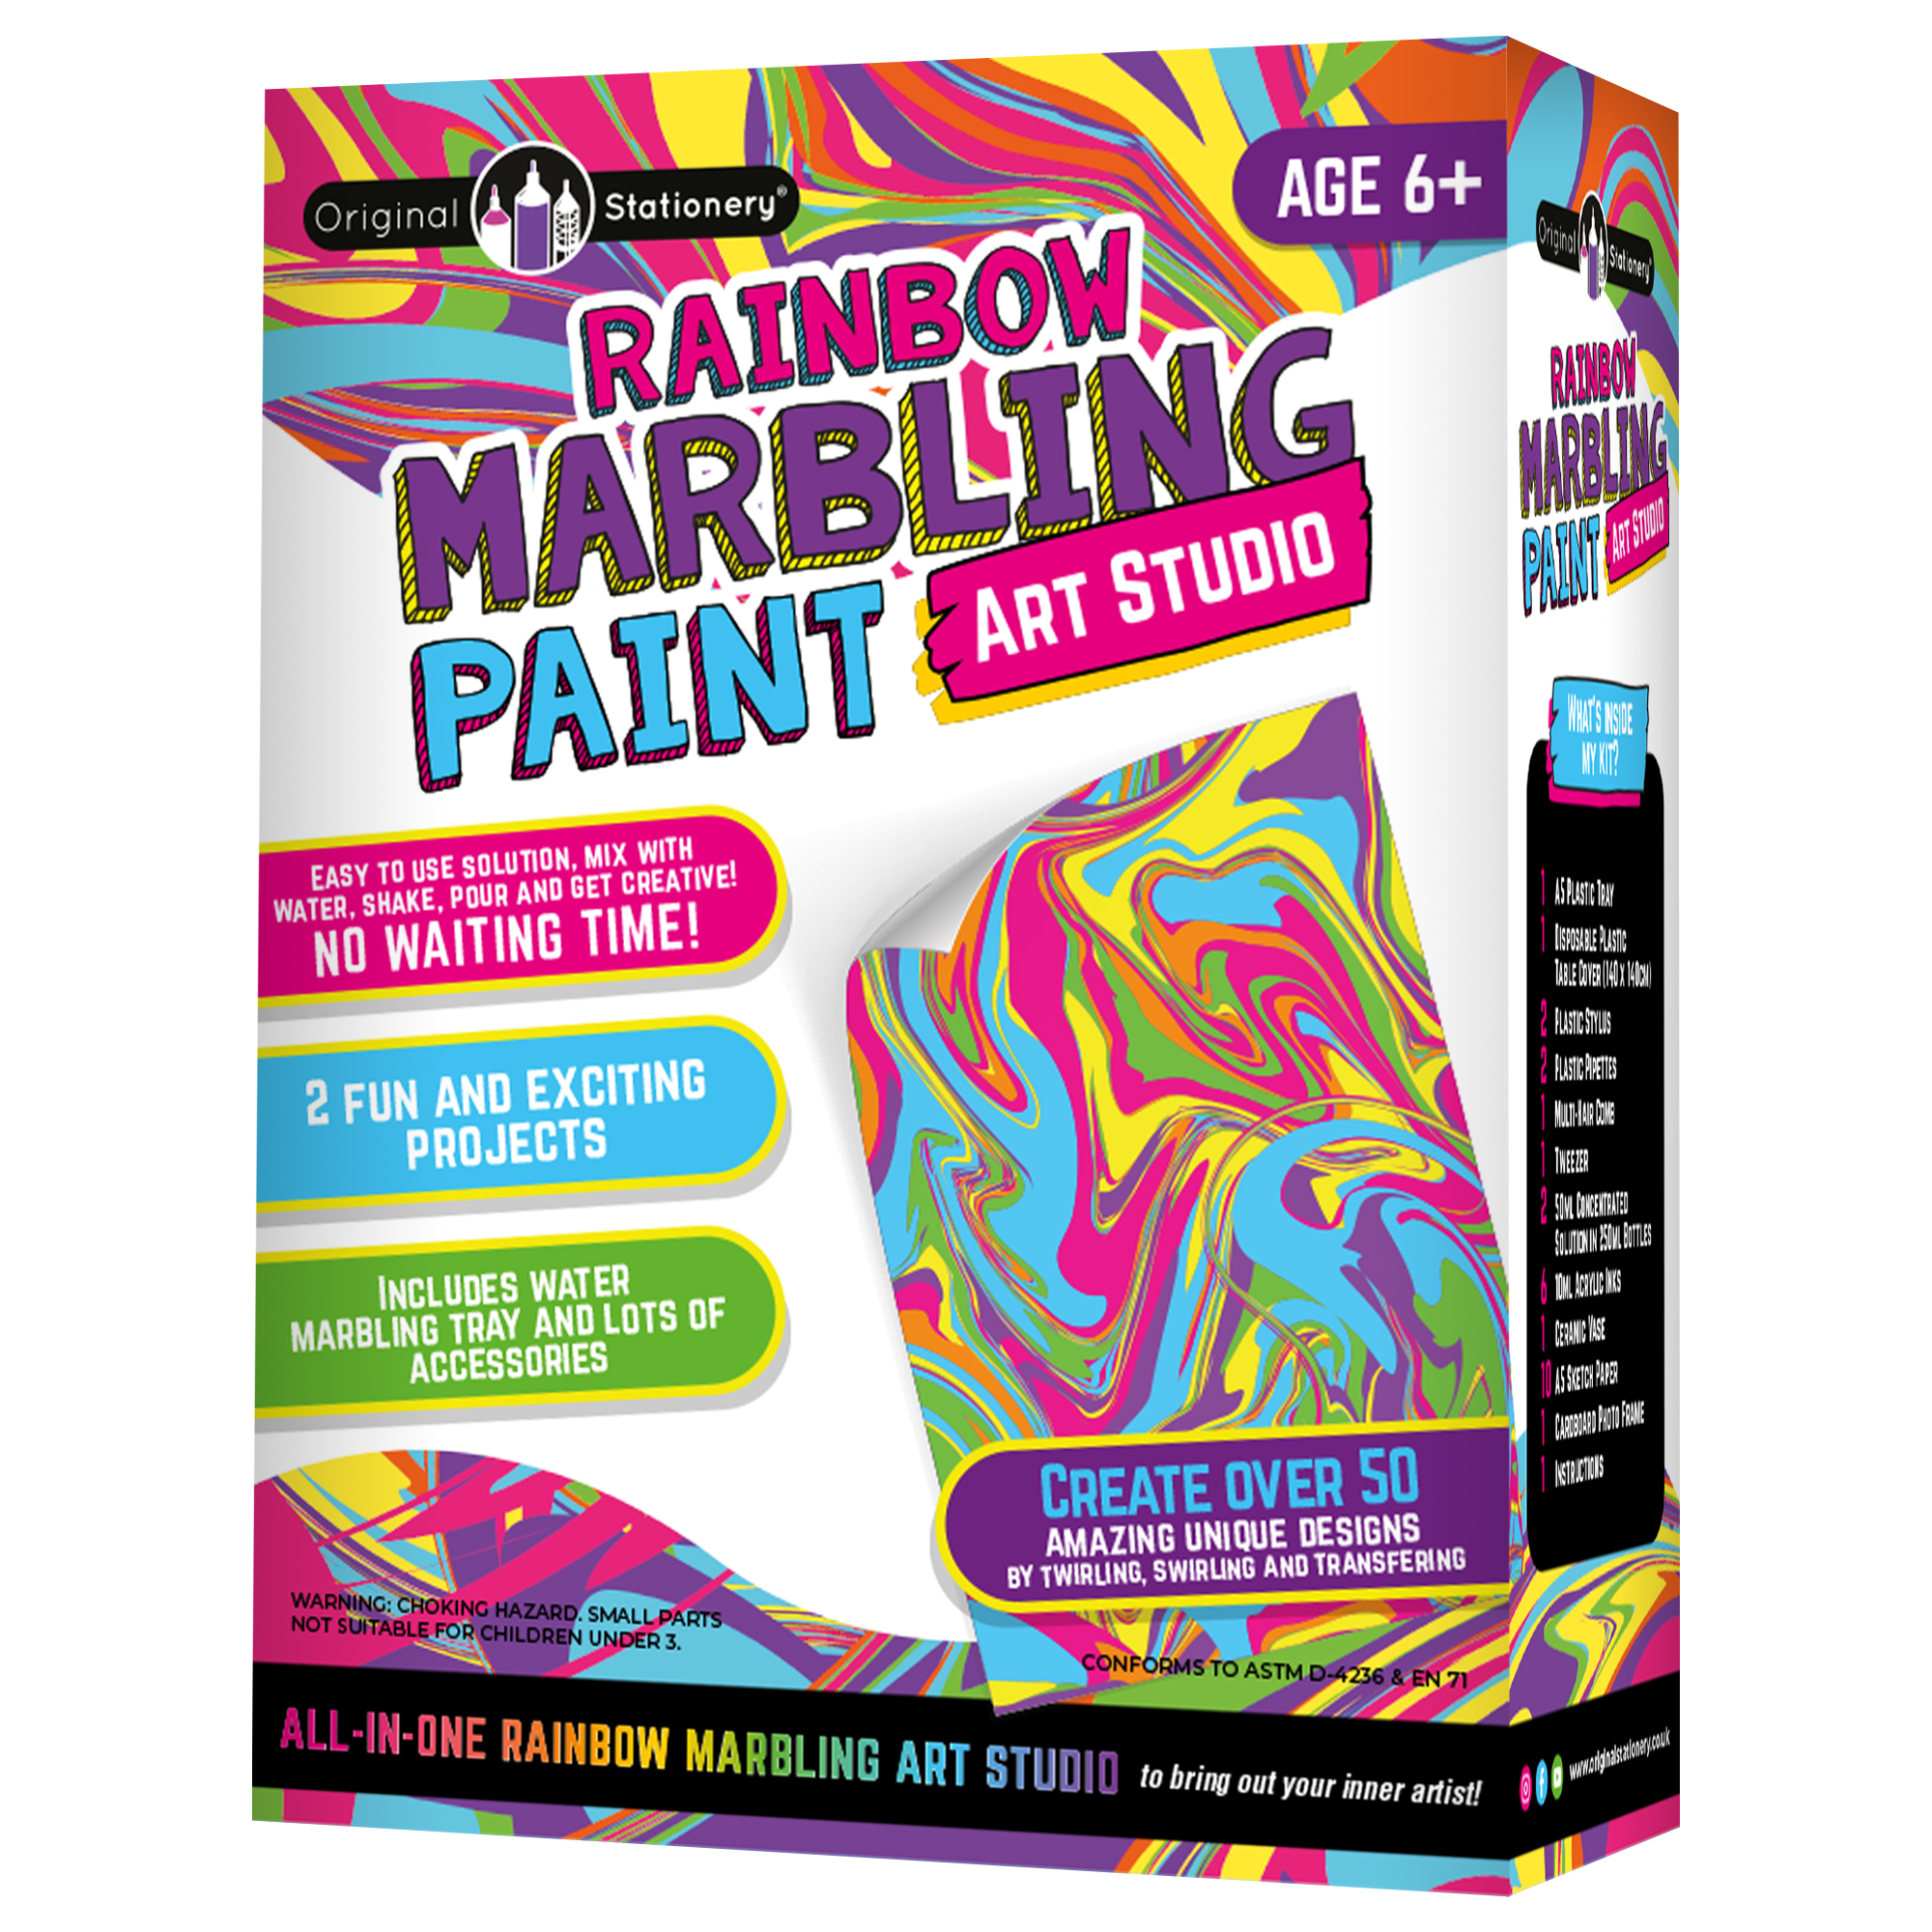 Marbling Instructions